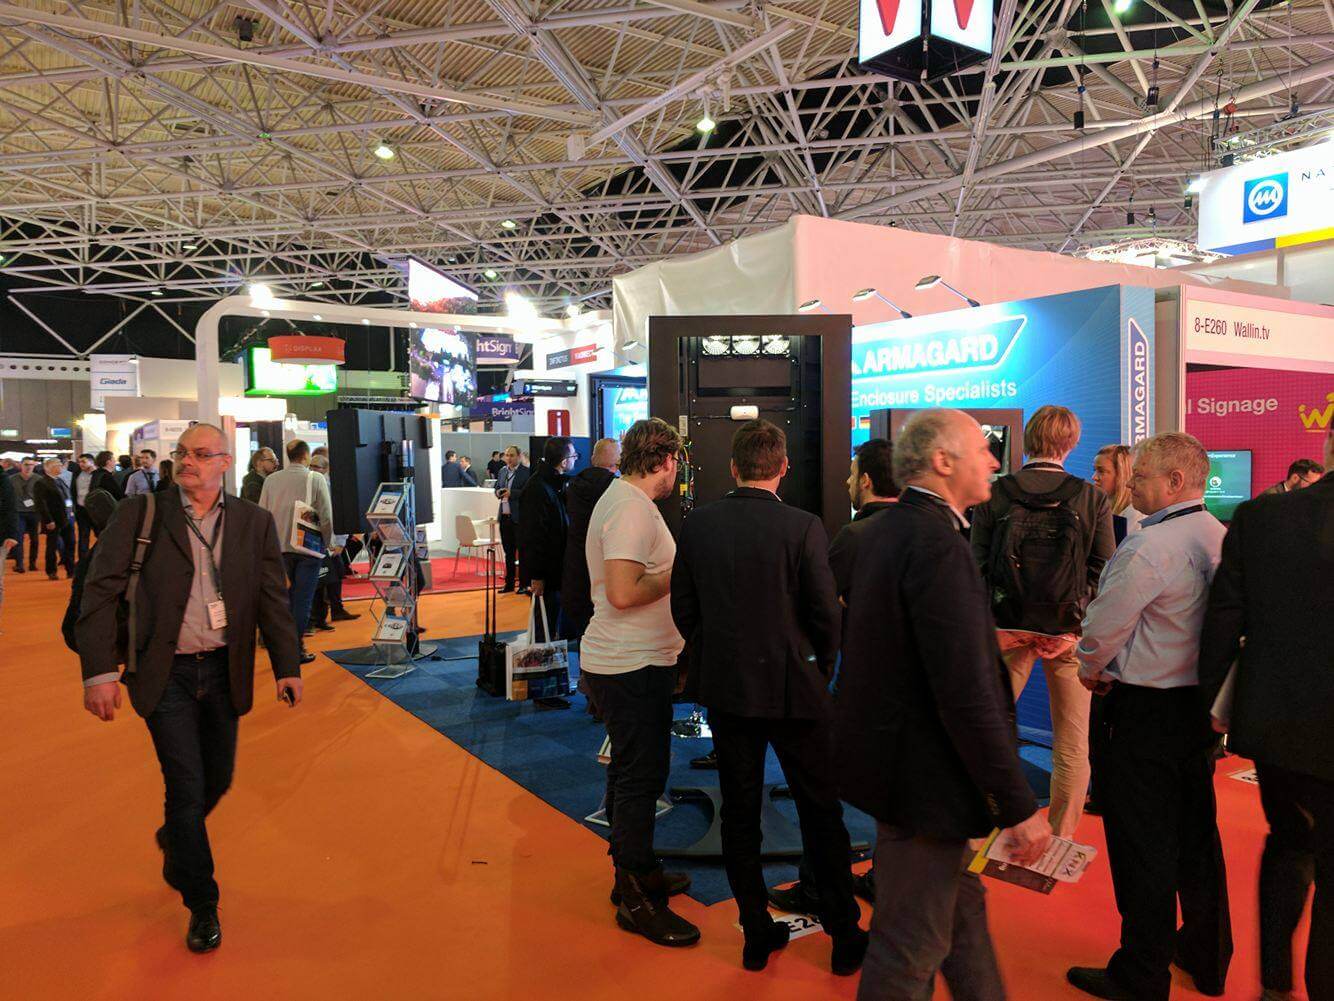 A busy trade show stand - the key to getting the most from trade show